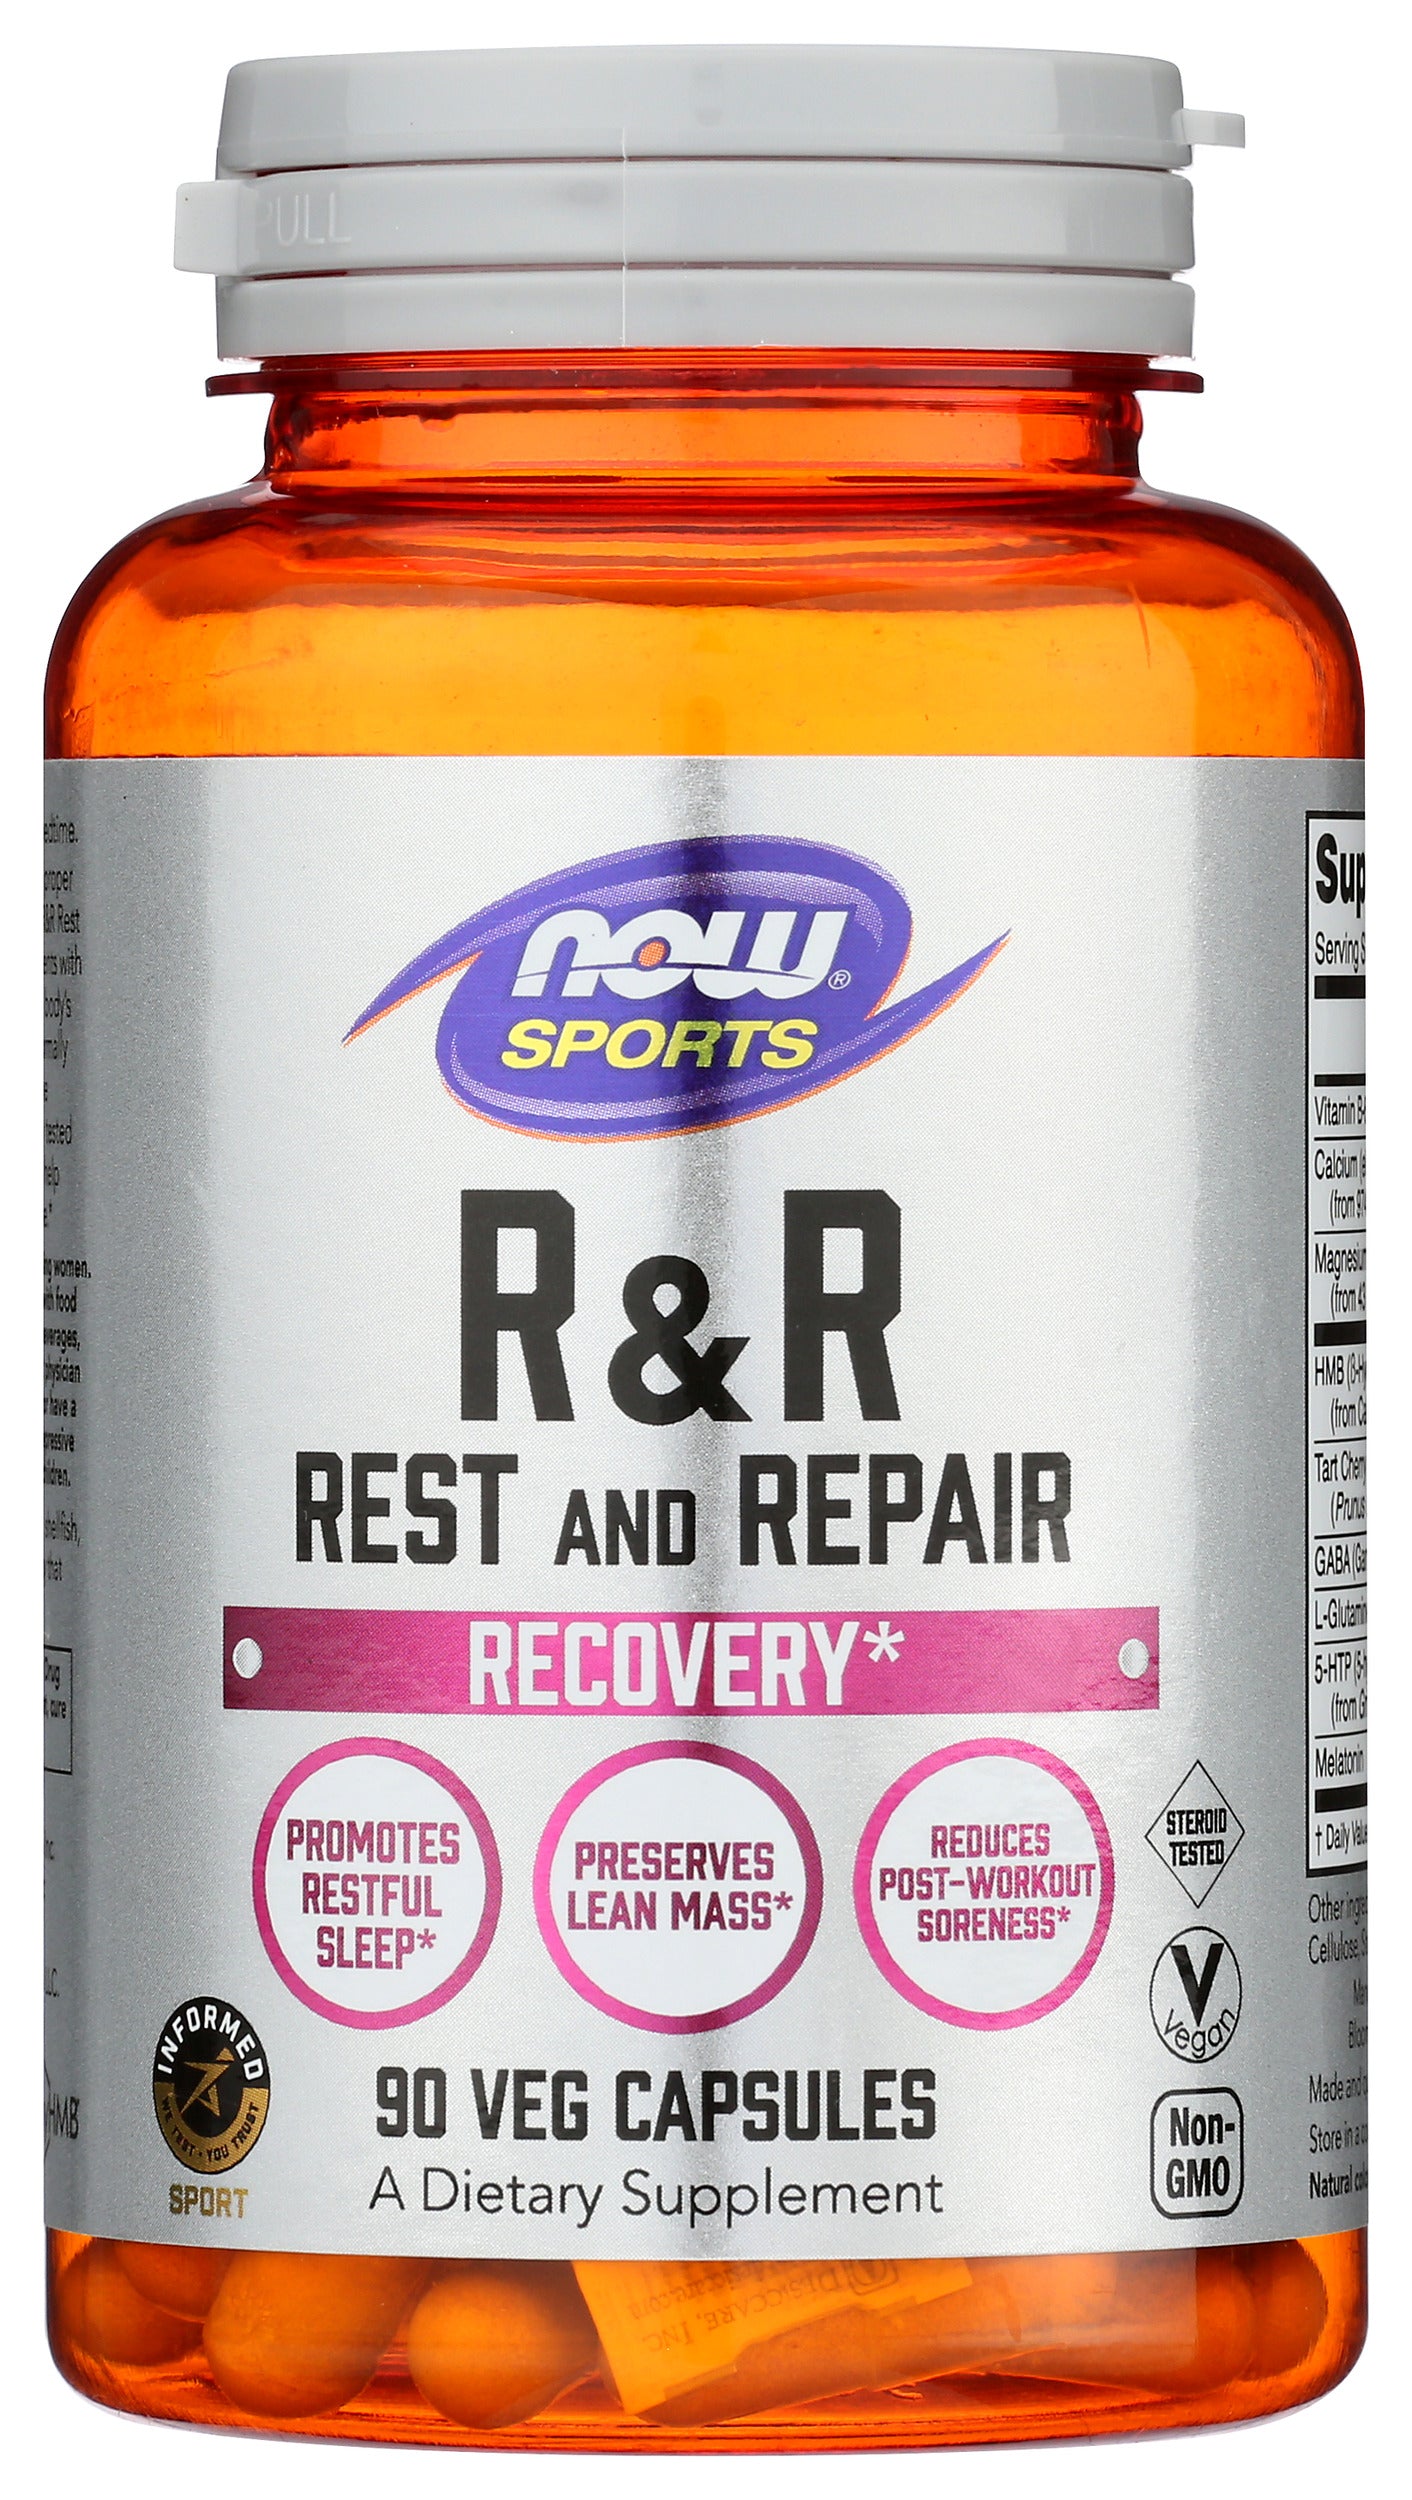 NOW Sports R&R Rest and Repair 90 Veg Capsules